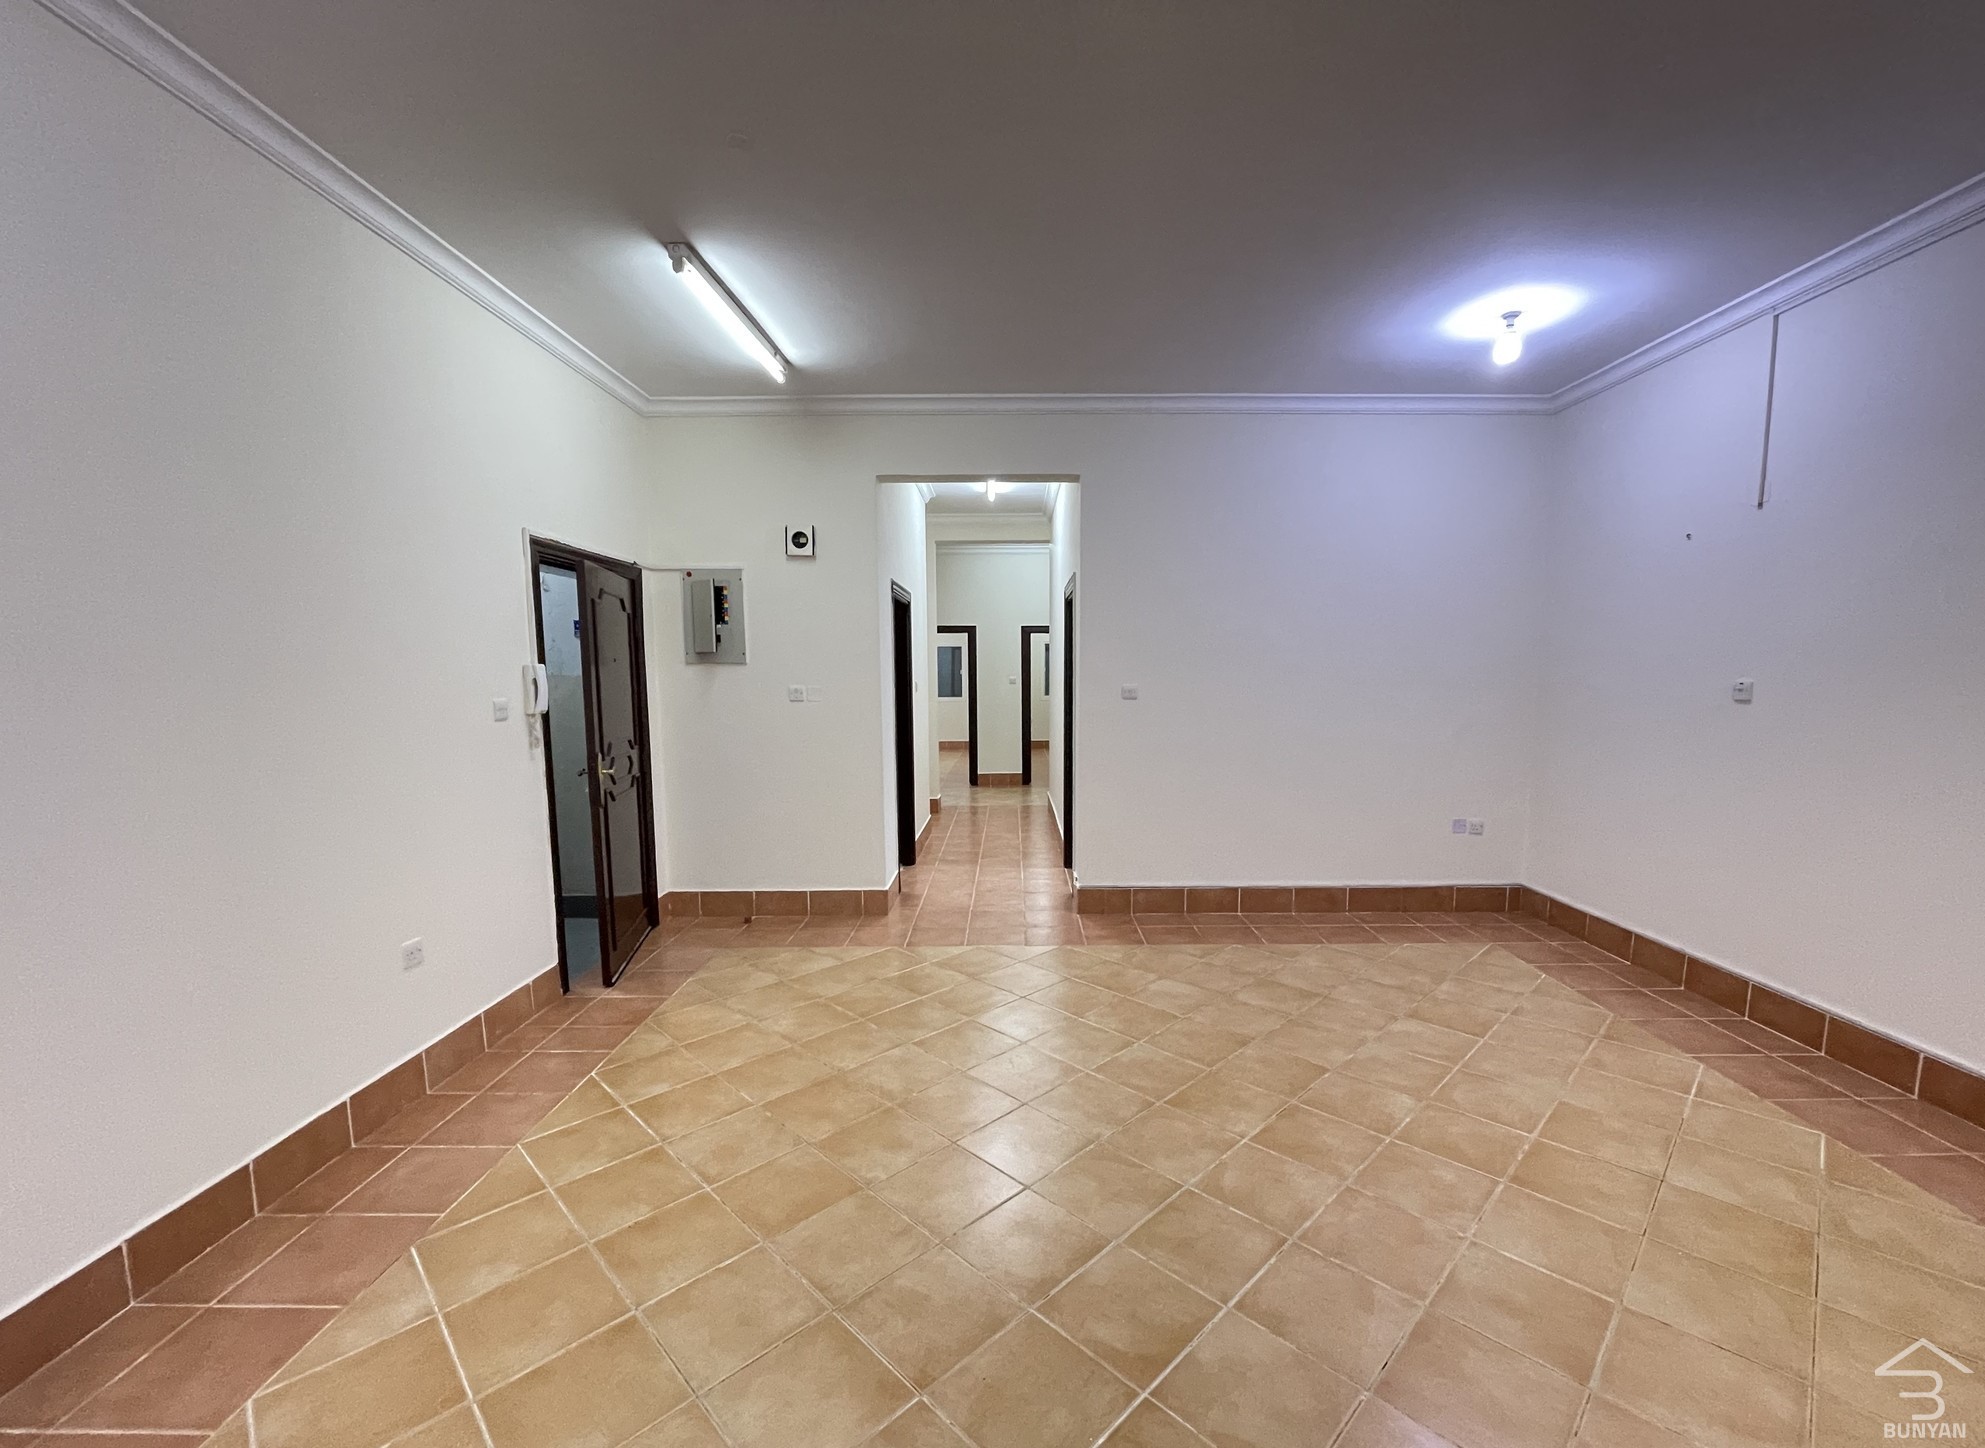 SPACIOUS 2 BR APARTMENT FOR RENT @OLD AIRPORT ( BEHIND CENTRAL TURKEY )